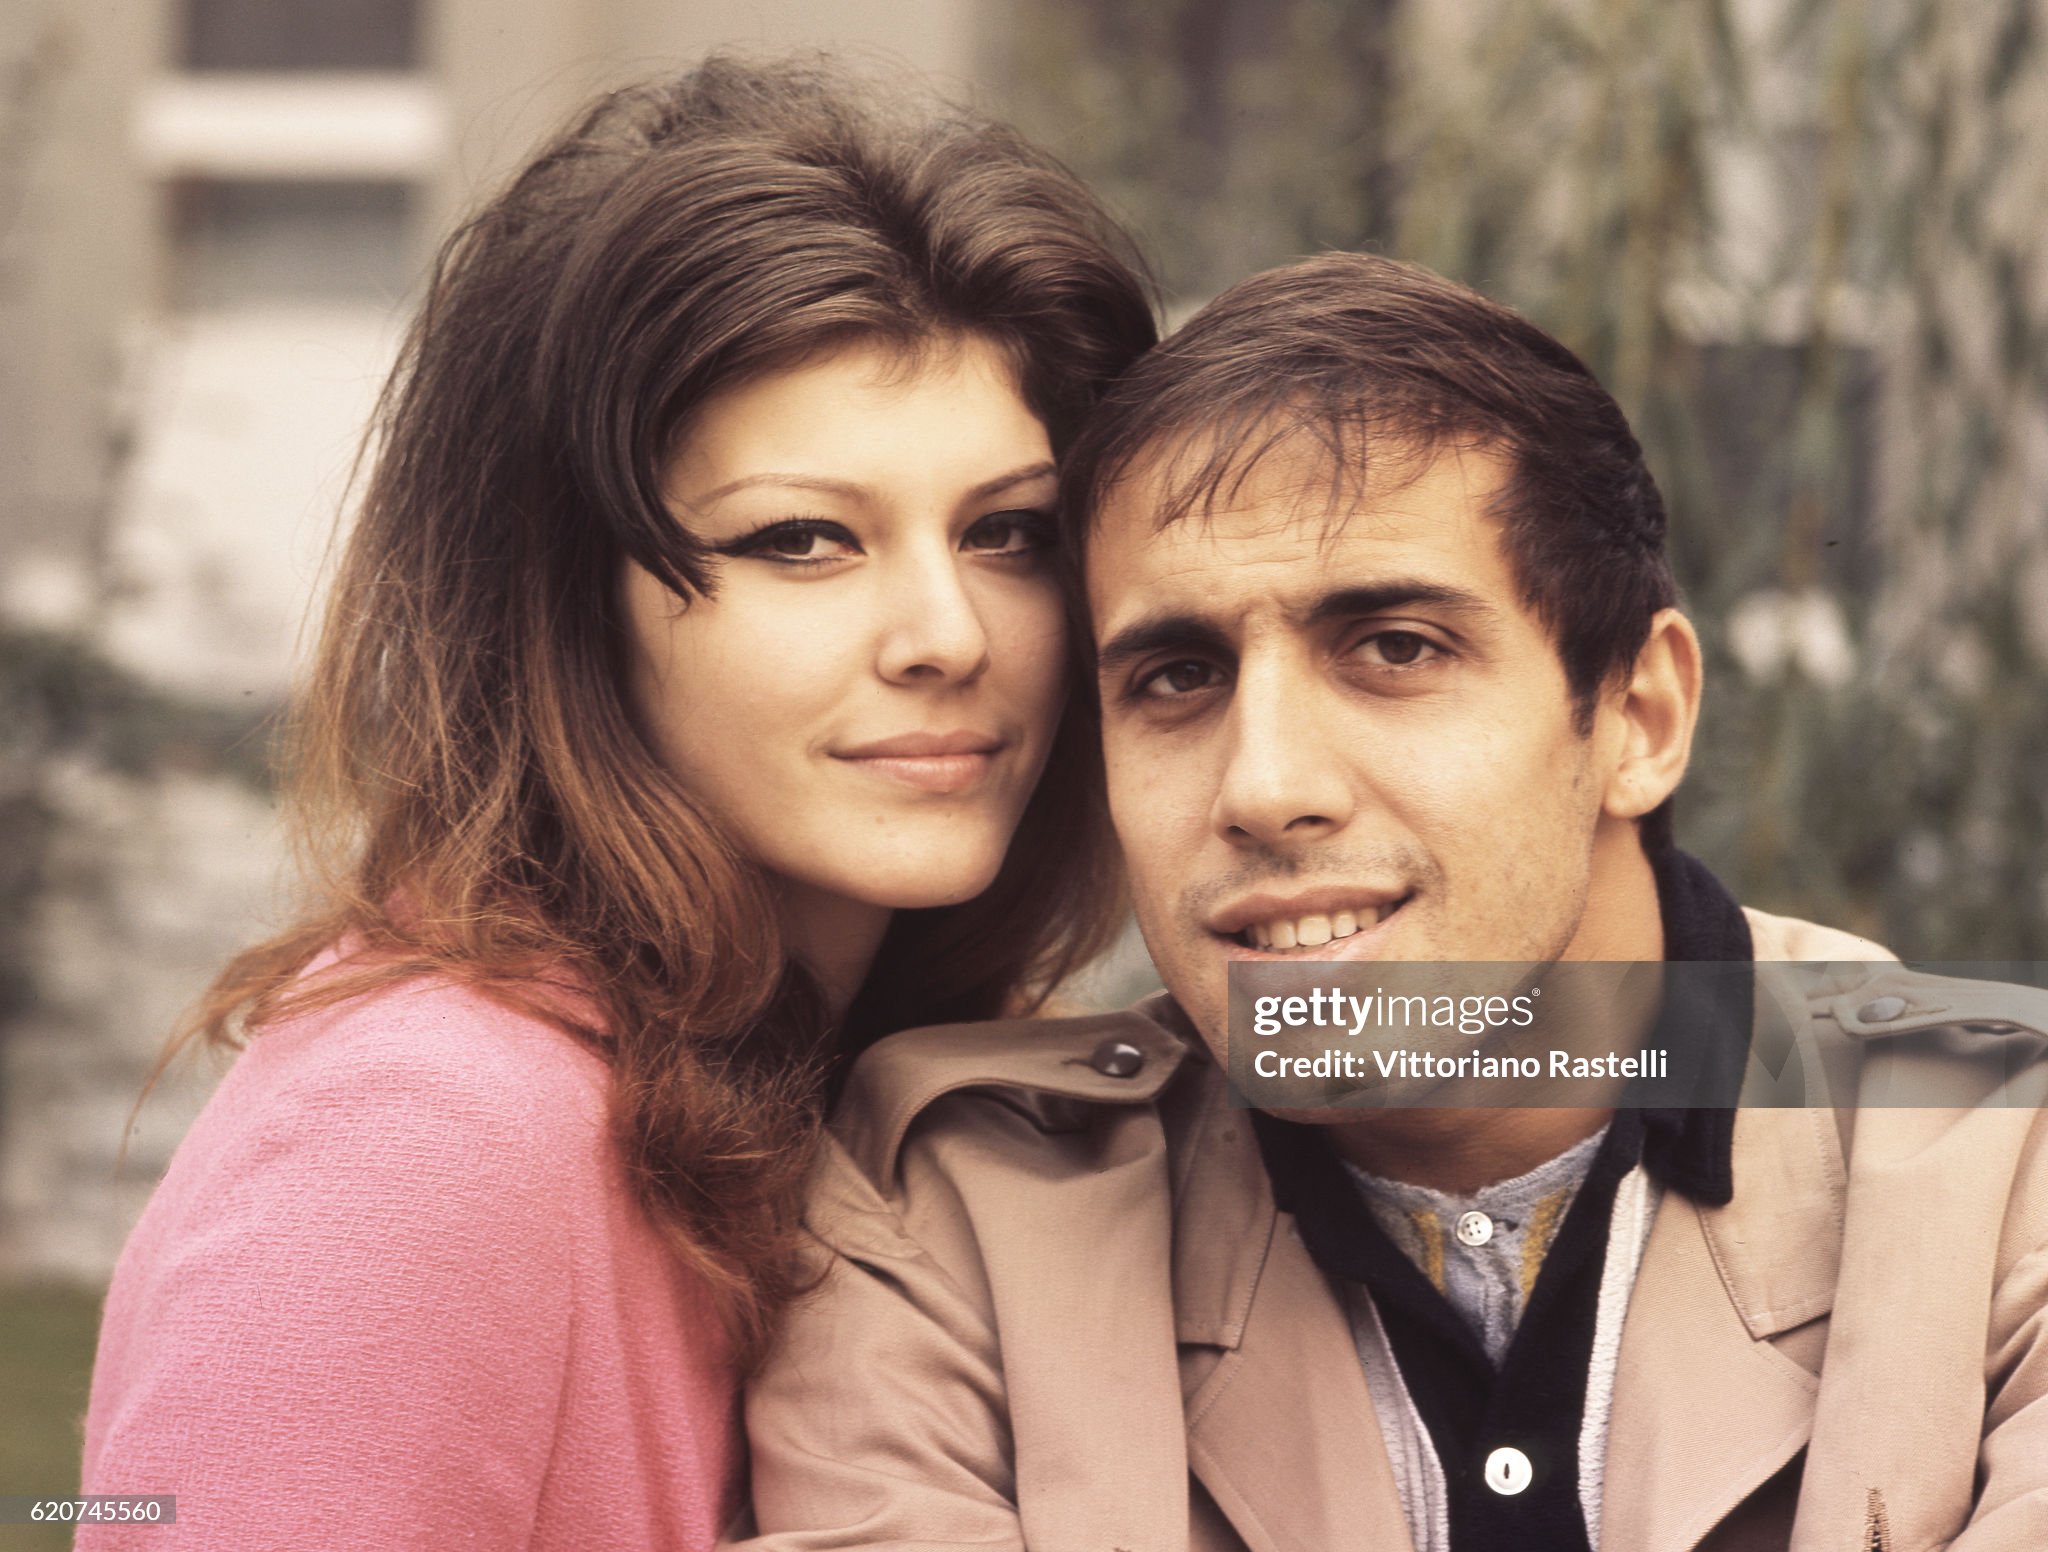 The actress Claudia Mori with her husband Adriano Celentano in Milan, Italy, on 12 October 1965. 